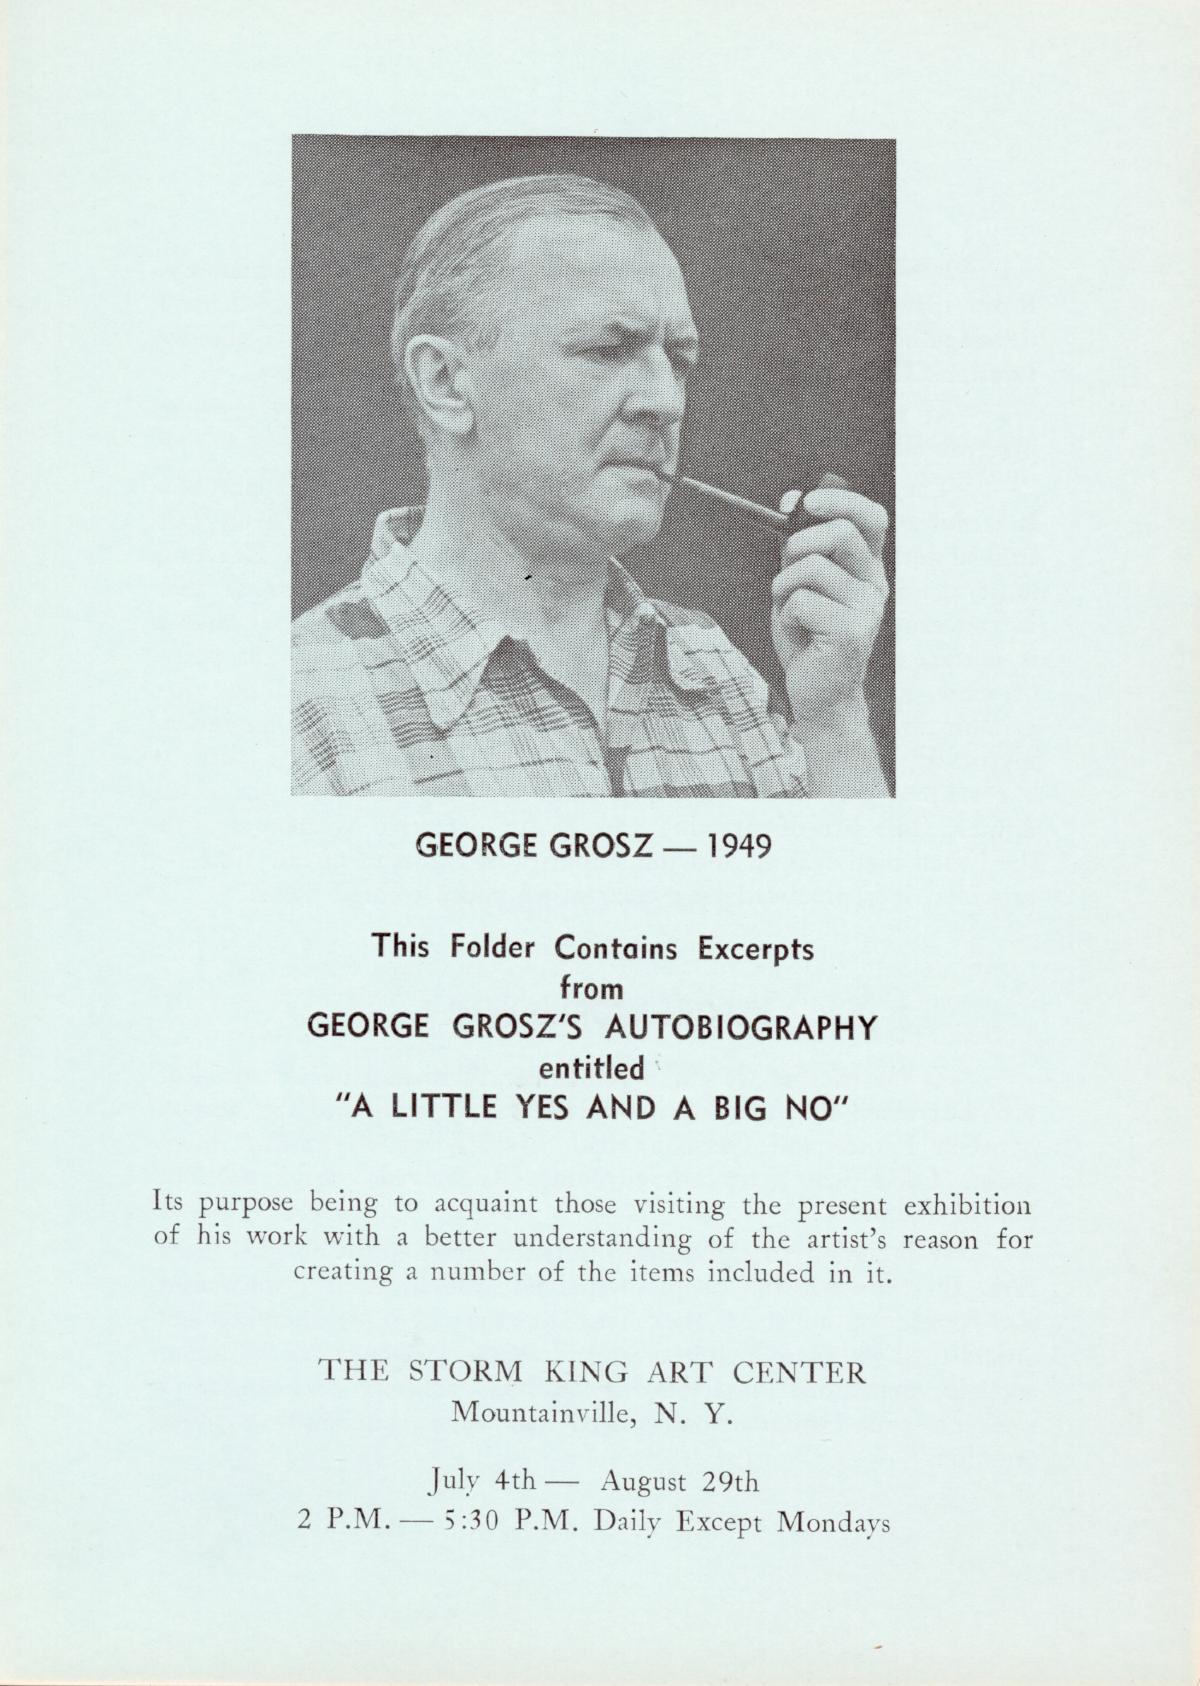 Paintings, Watercolors, Drawings, Prints by George Grosz (1893-1959), July 4-August 29, 1965, exhibition handout